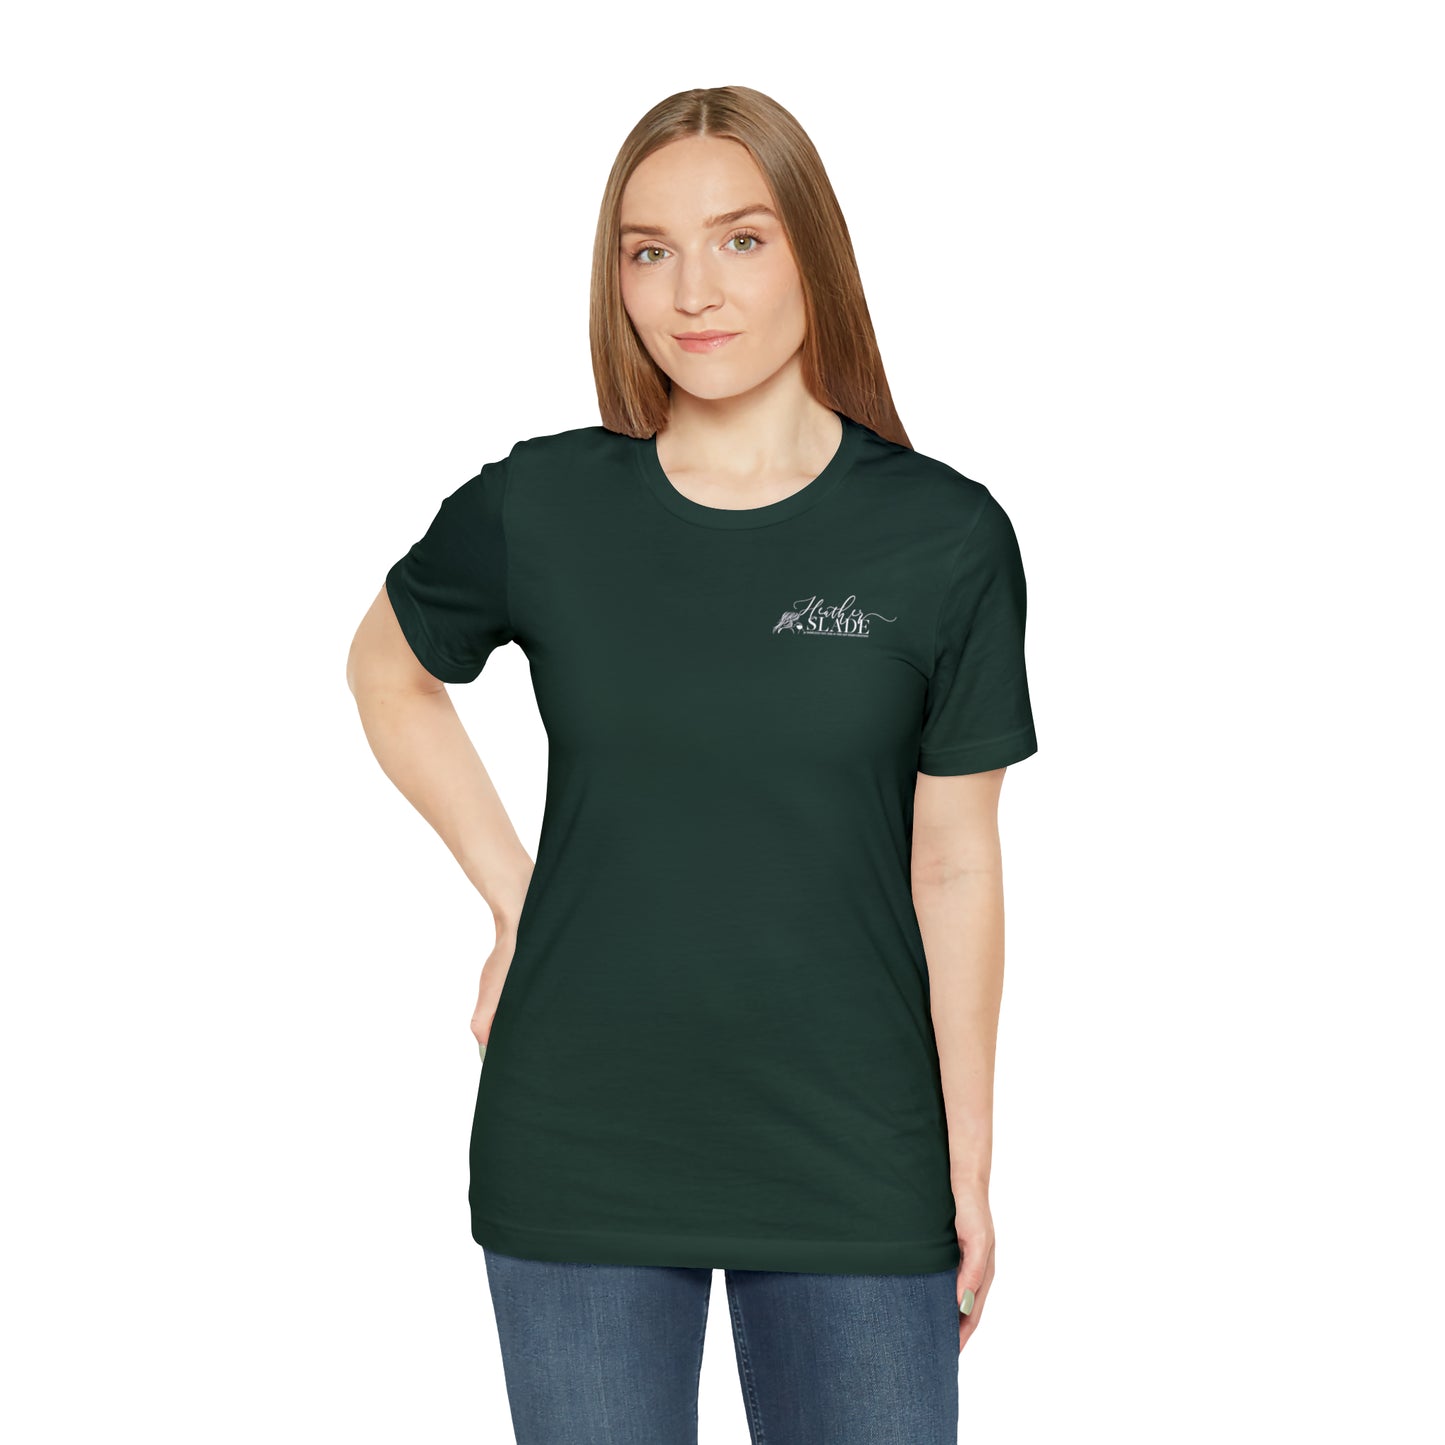 The Unstoppables Team One Jersey Short Sleeve Tee